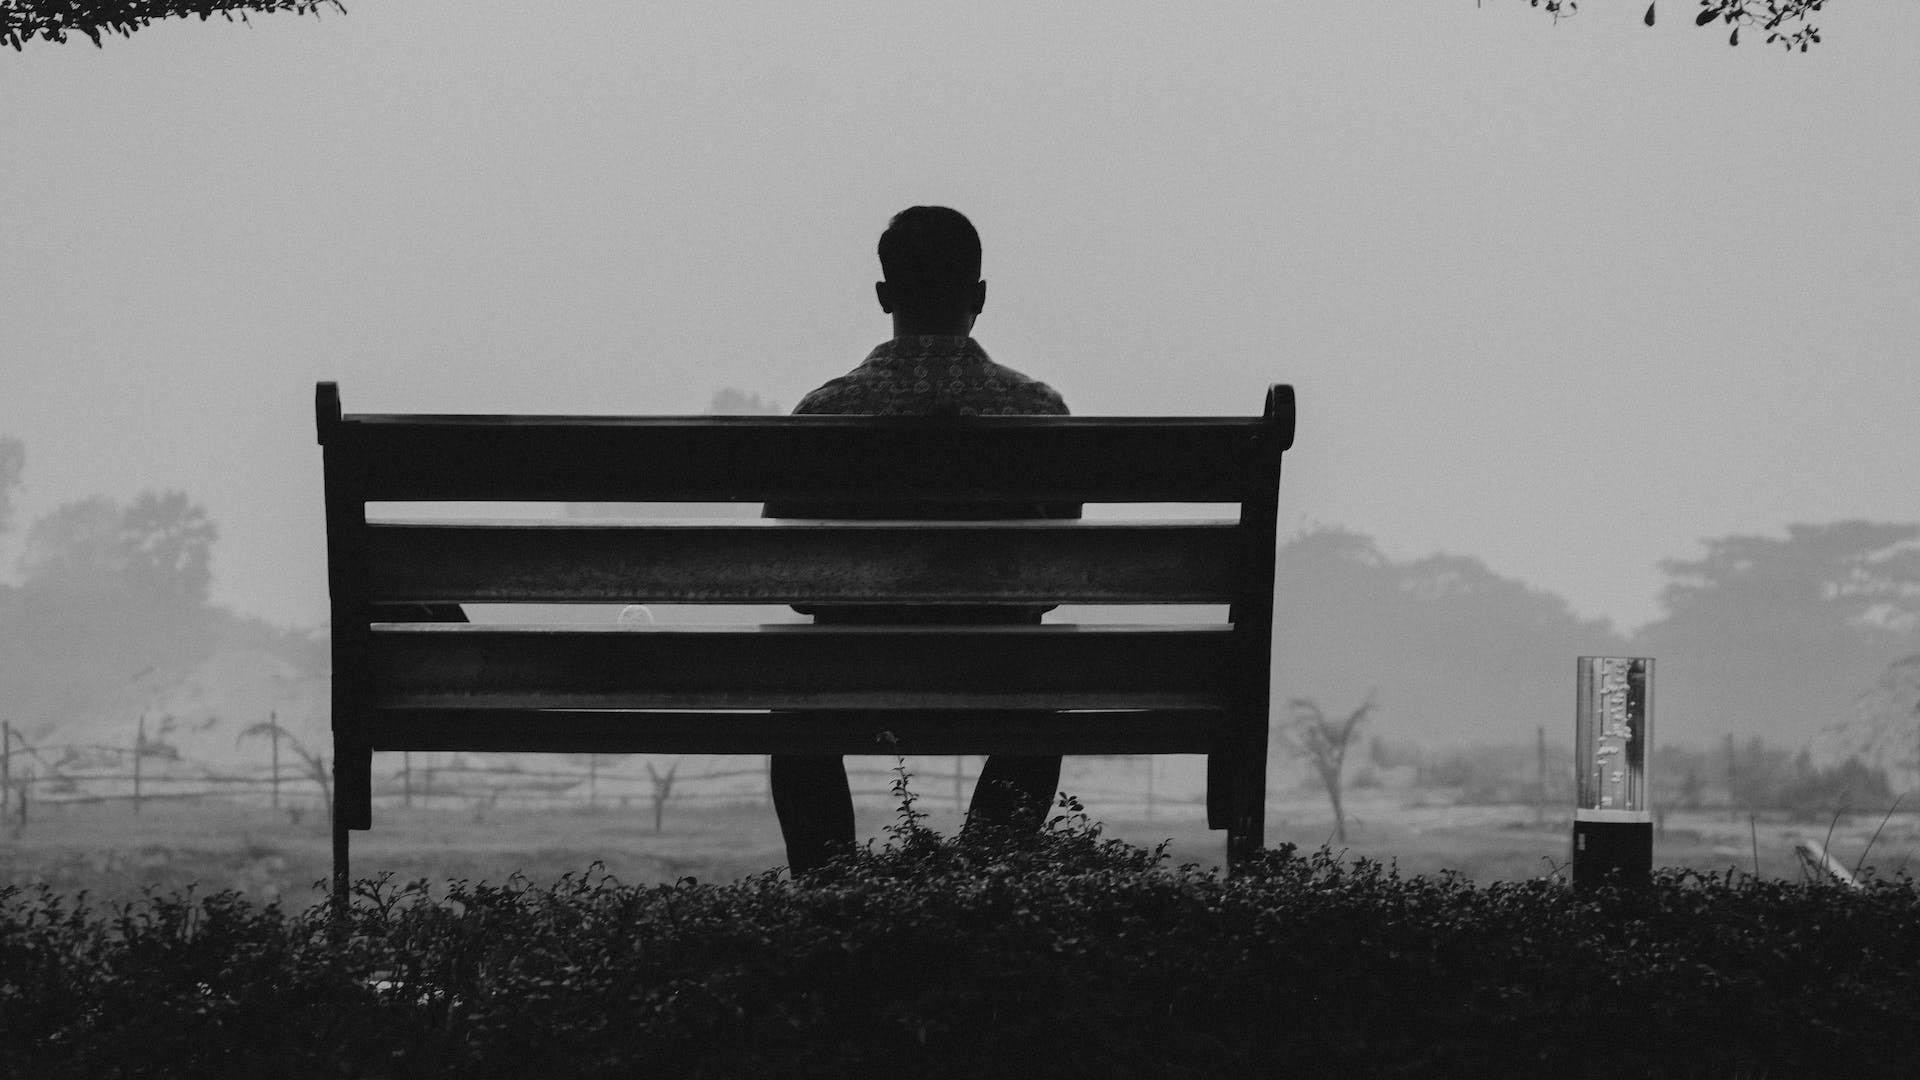 Exploring the Various Dimensions of Loneliness